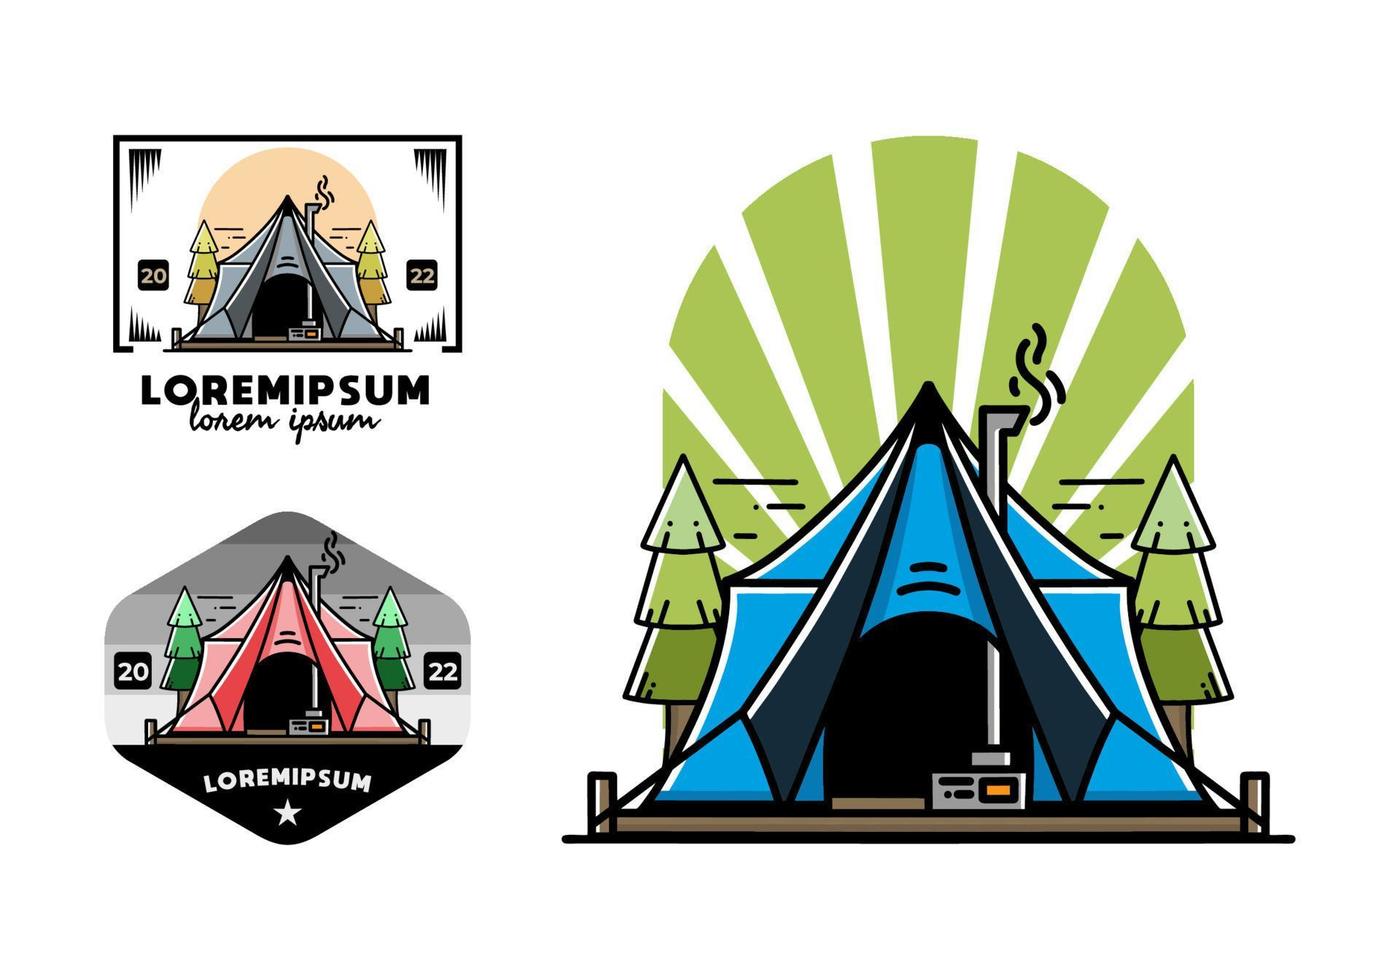 Large glamping tent with heater and chimney illustration design vector